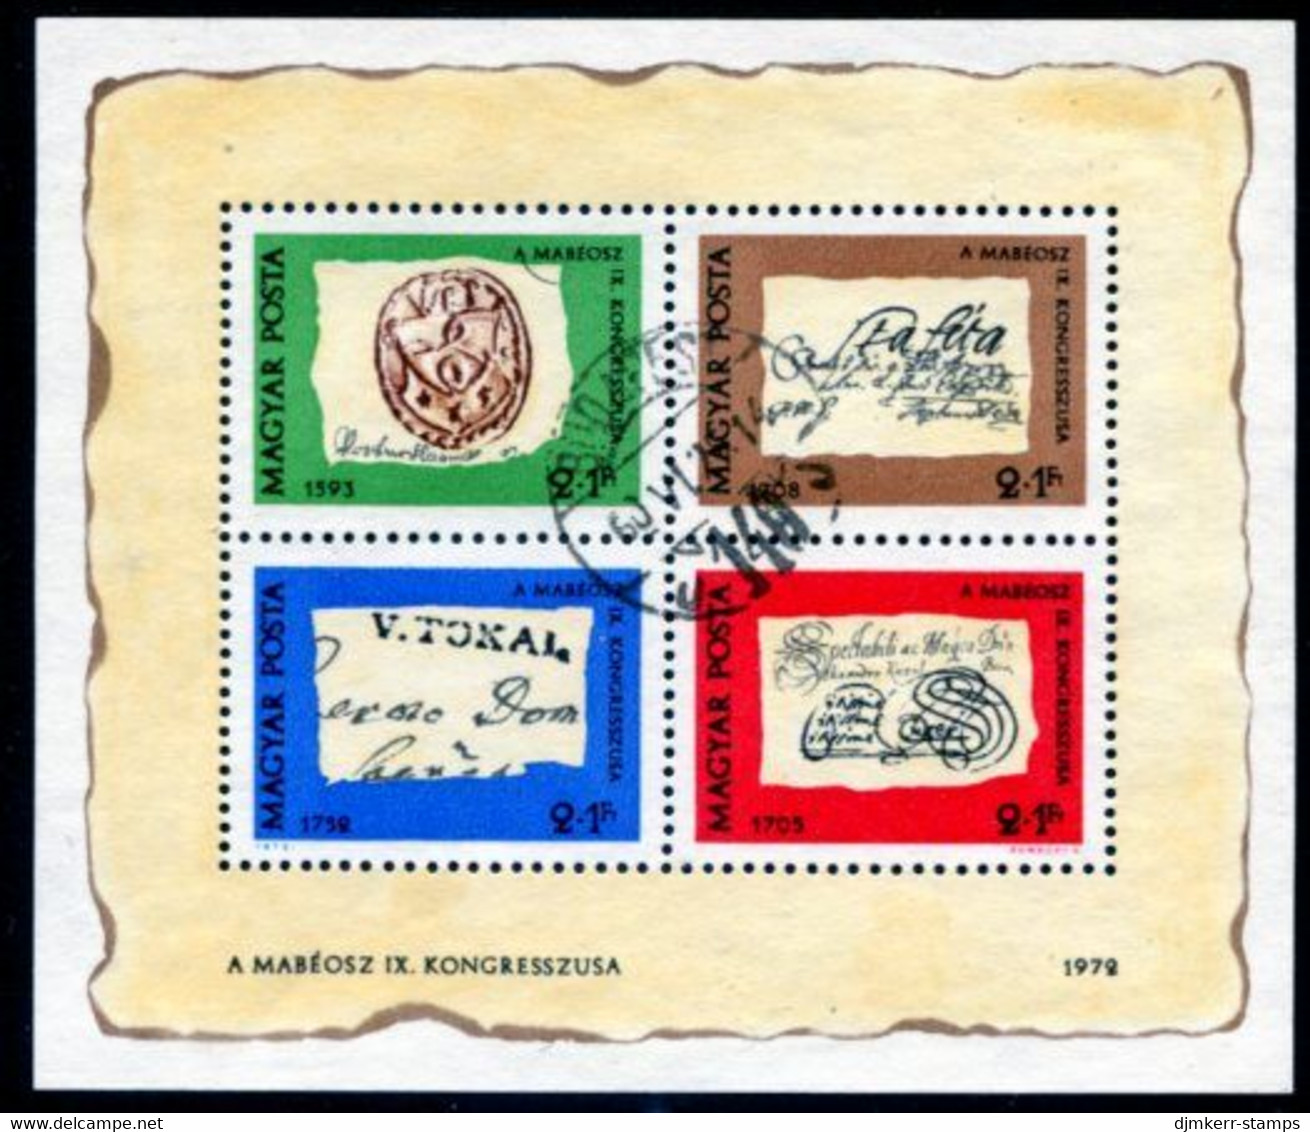 HUNGARY 1972 Stamp Day Block Used.  Michel Block 88 - Used Stamps